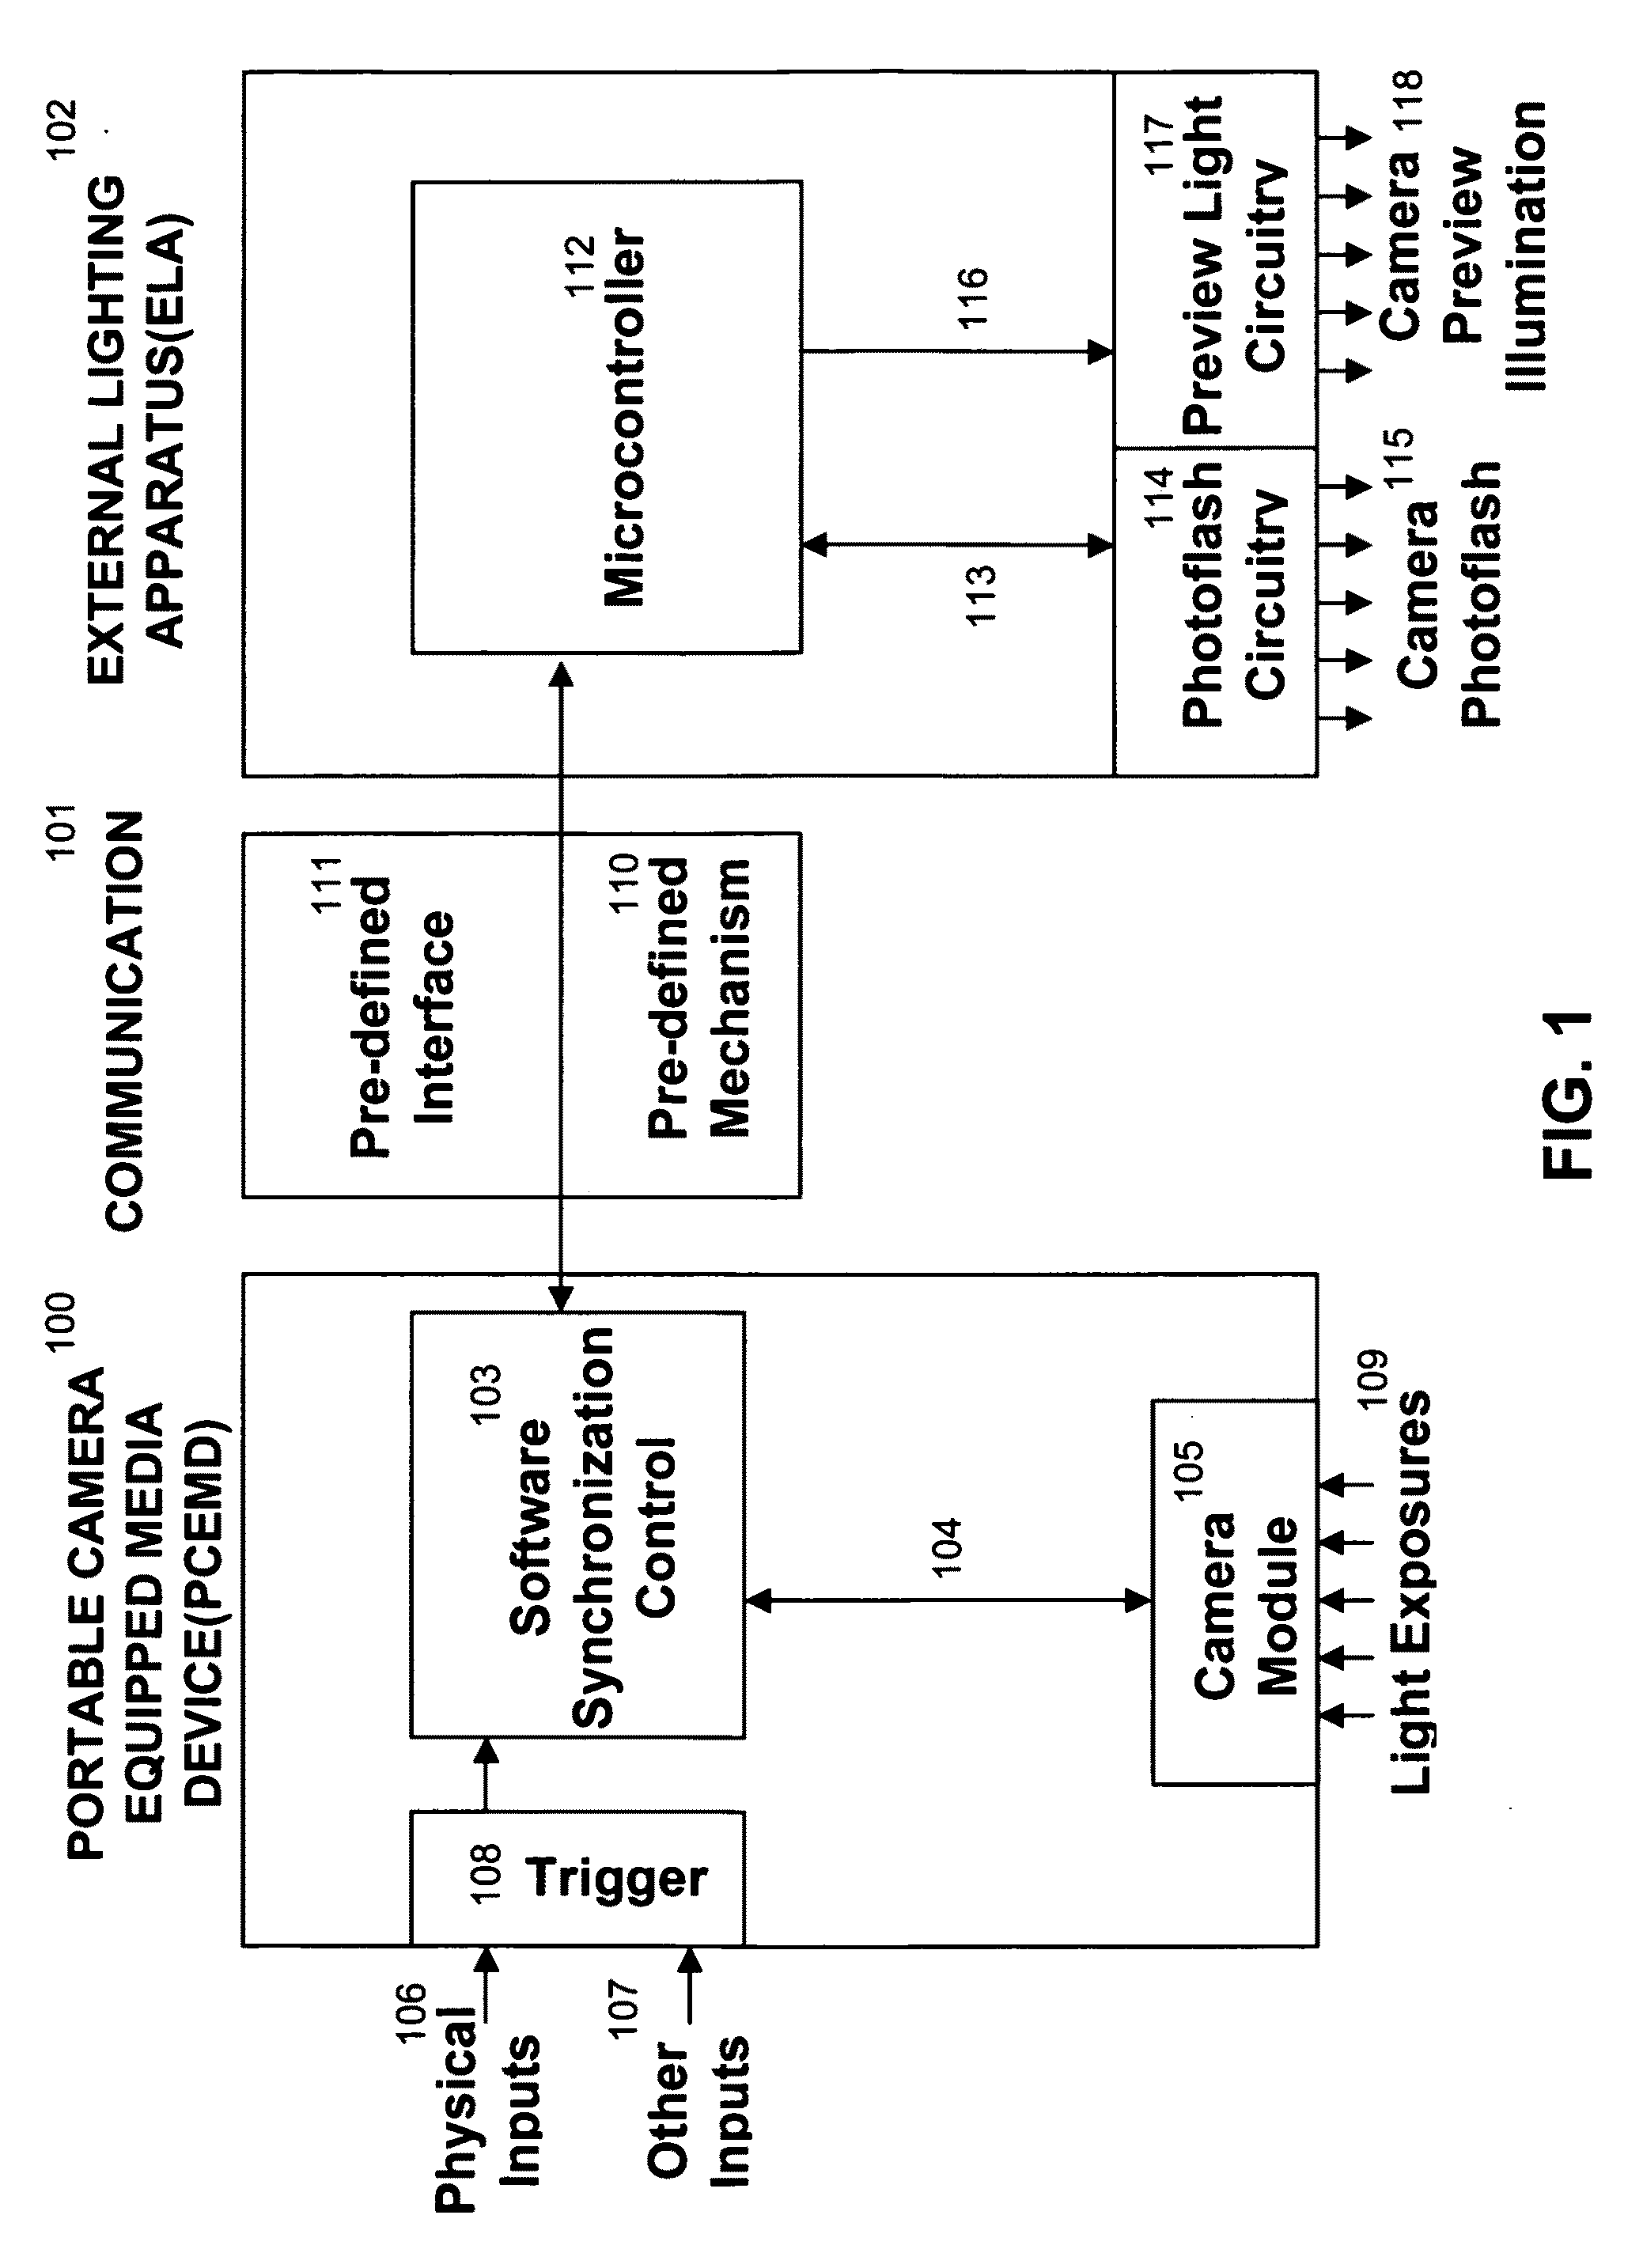 Software Based Photoflash synchronization of camera equipped portable media device and external lighting apparatus